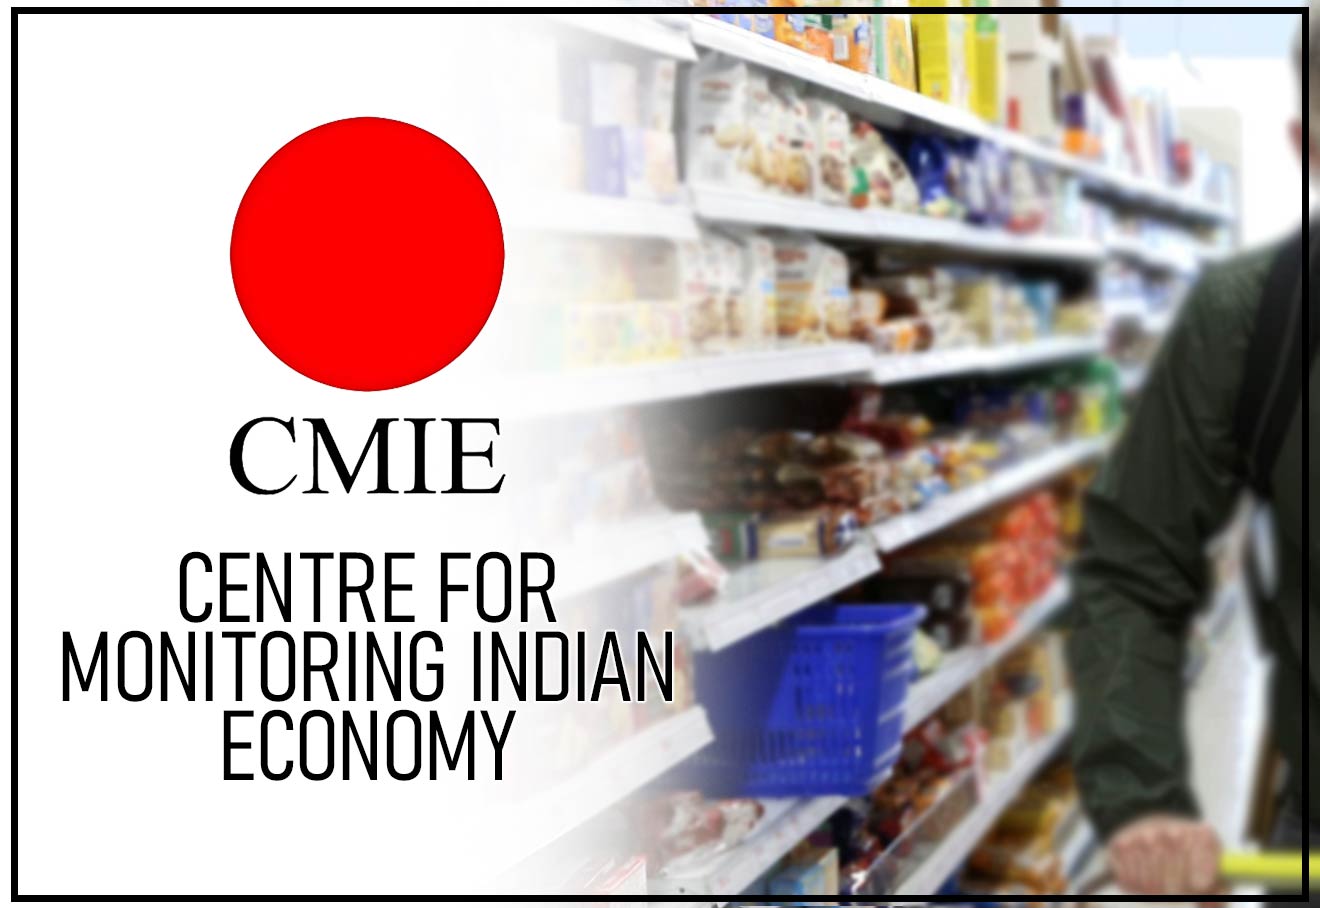 India’s Consumer Sentiment Dipped In August: CMIE